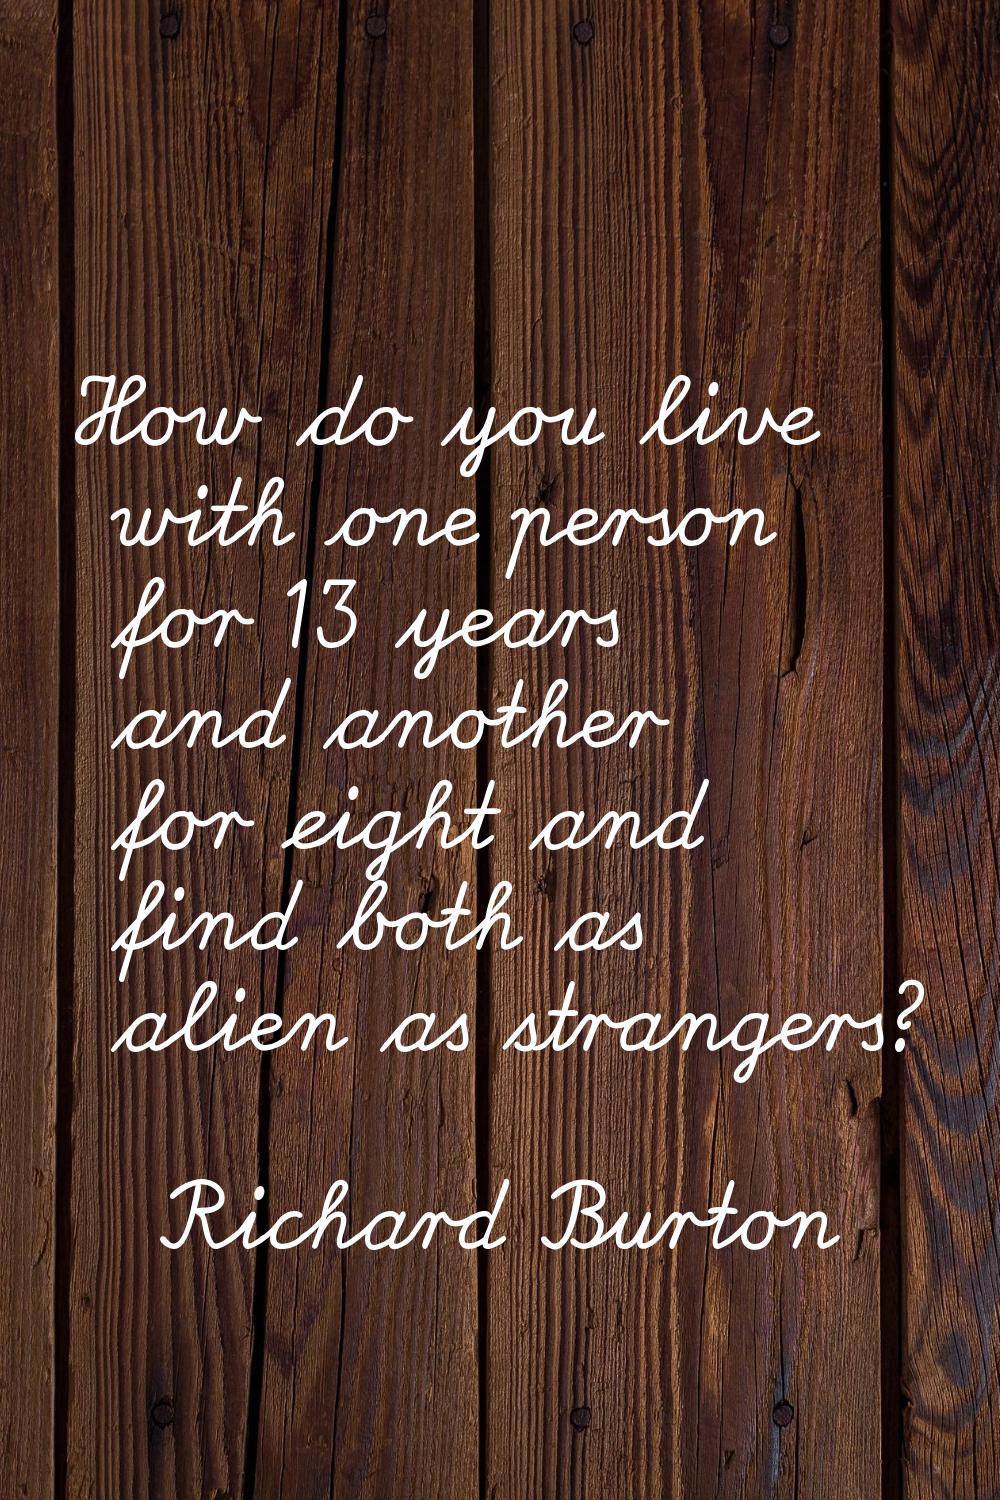 How do you live with one person for 13 years and another for eight and find both as alien as strang